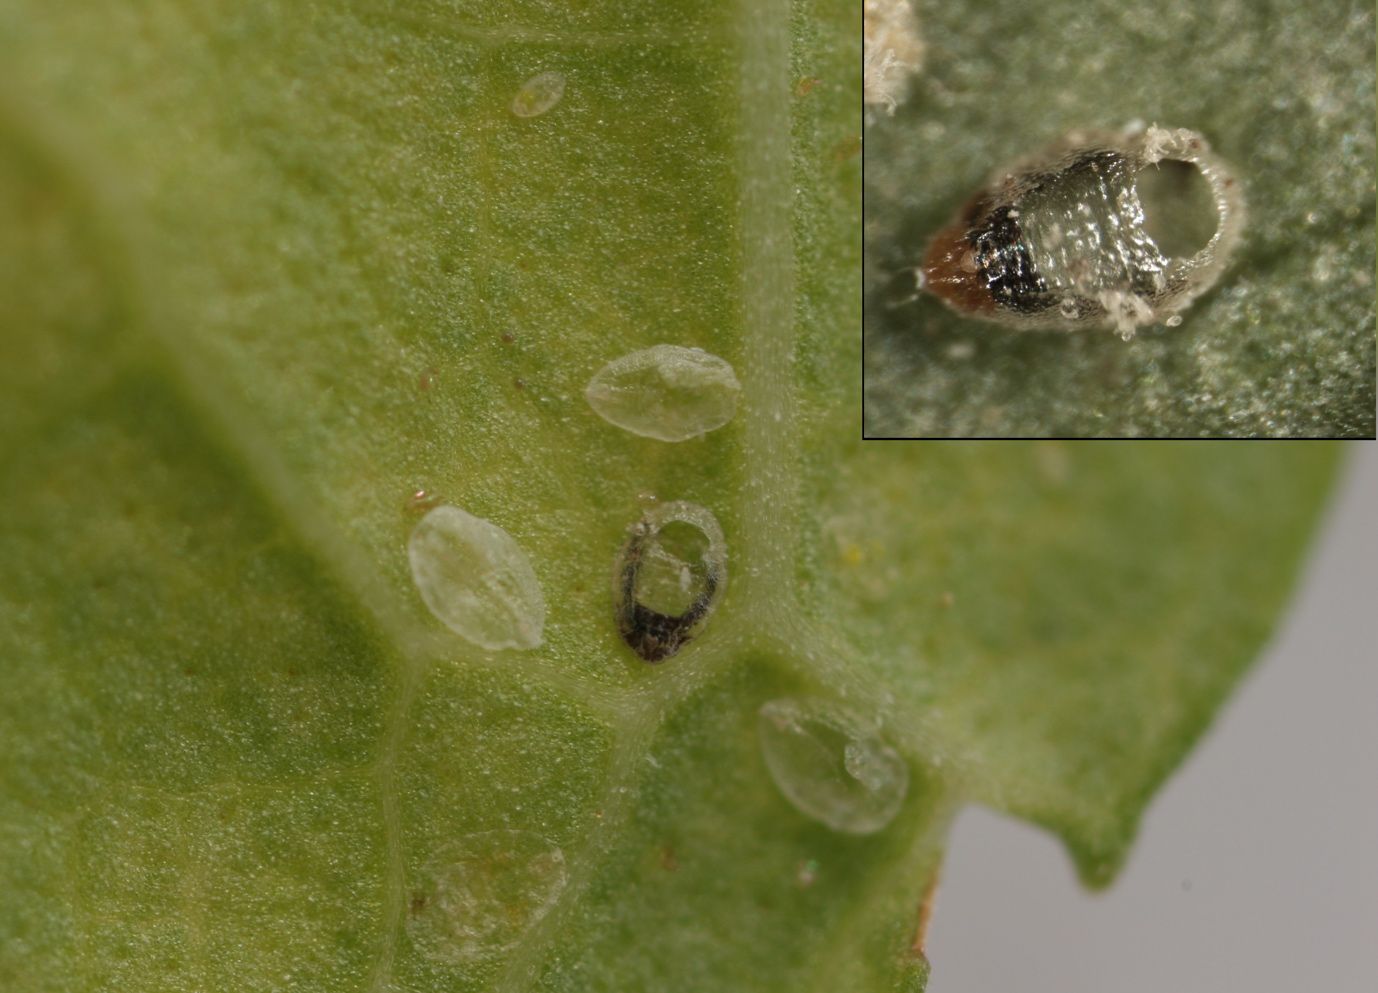 A hole in old whitefly pupal casing (dark colored) made by an emerged adult parasitoid.